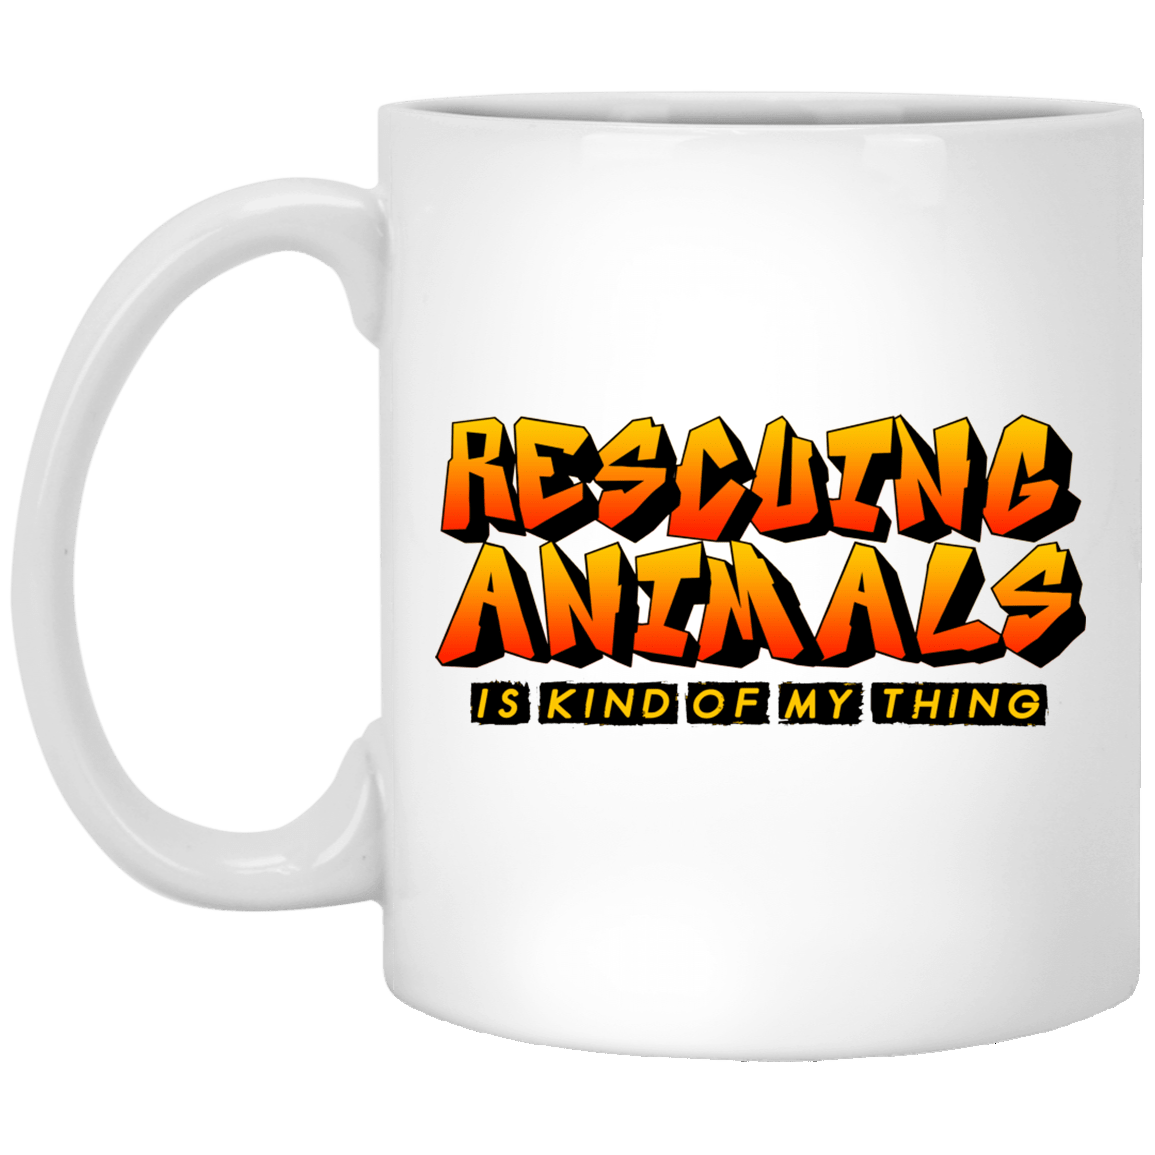 Rescuing Animals Is My Kind Of Thing - Mugs.